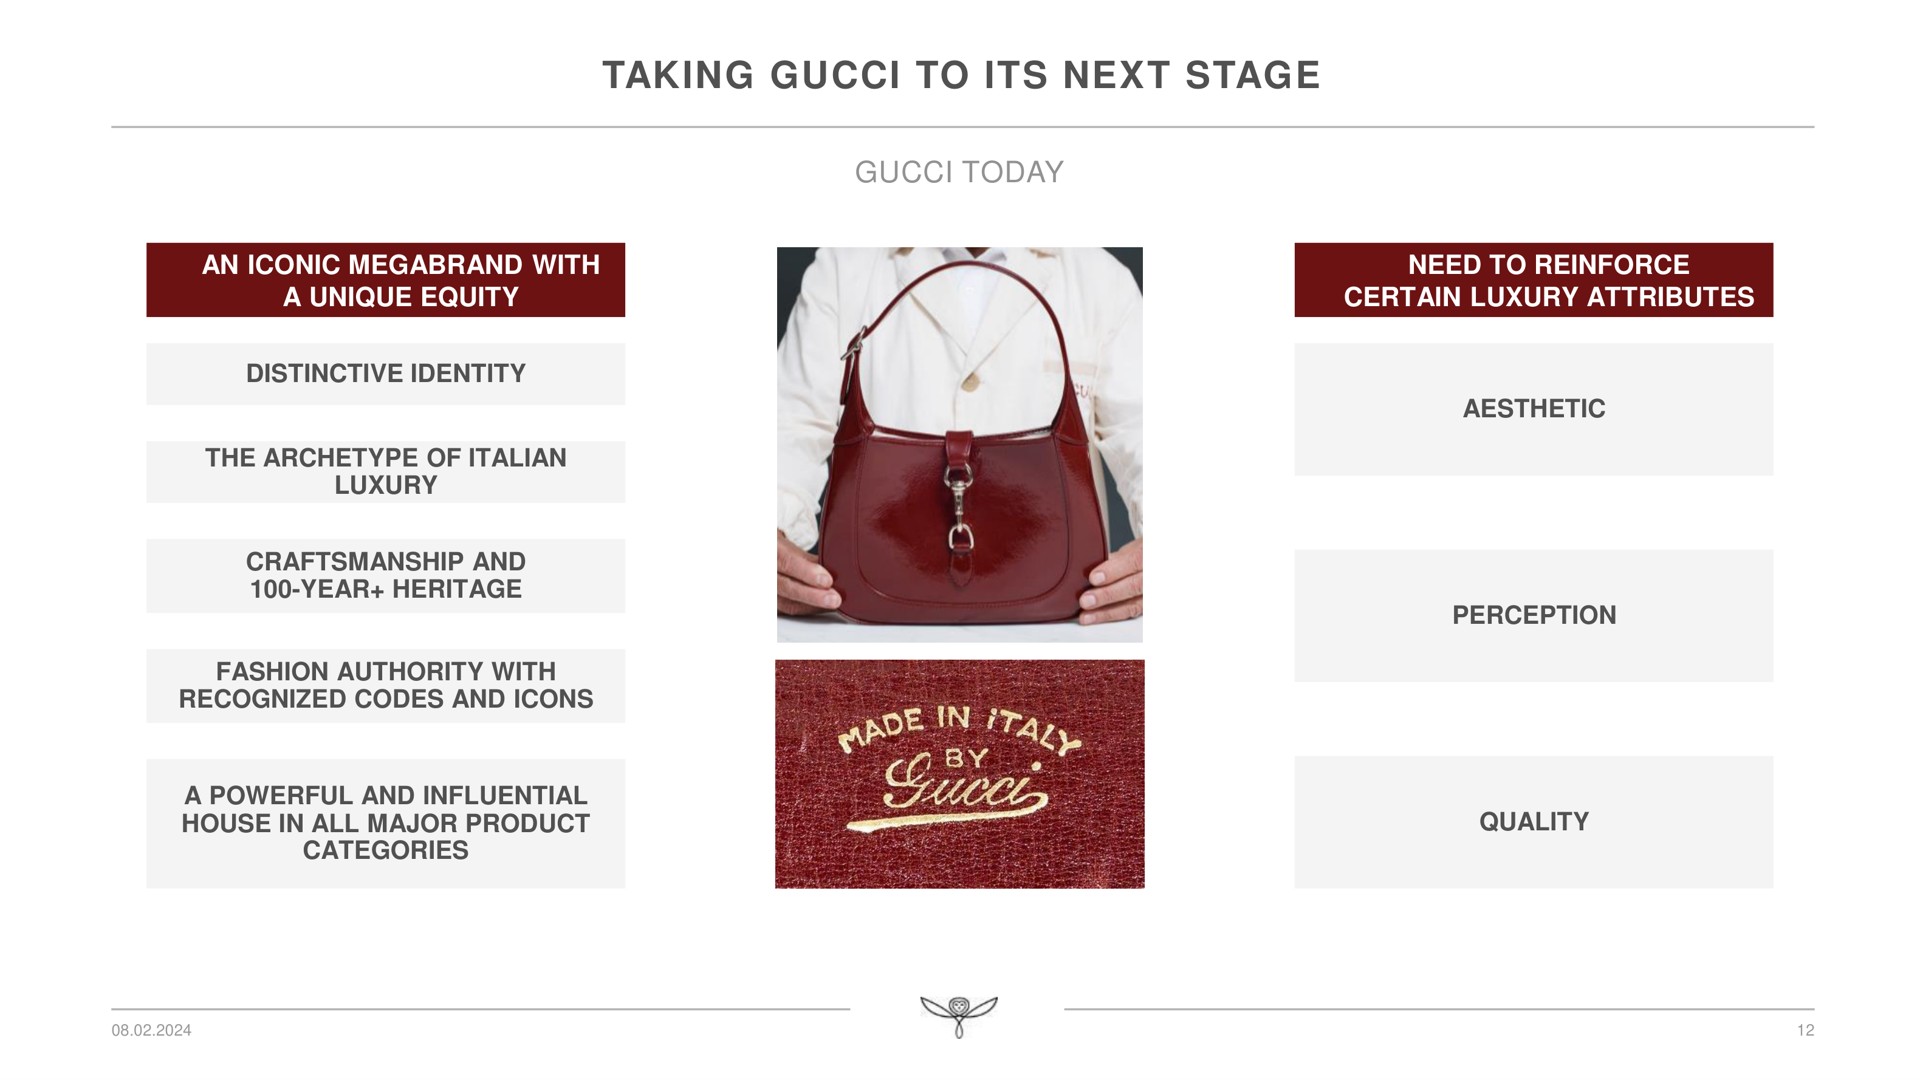 taking to its next stage | Kering